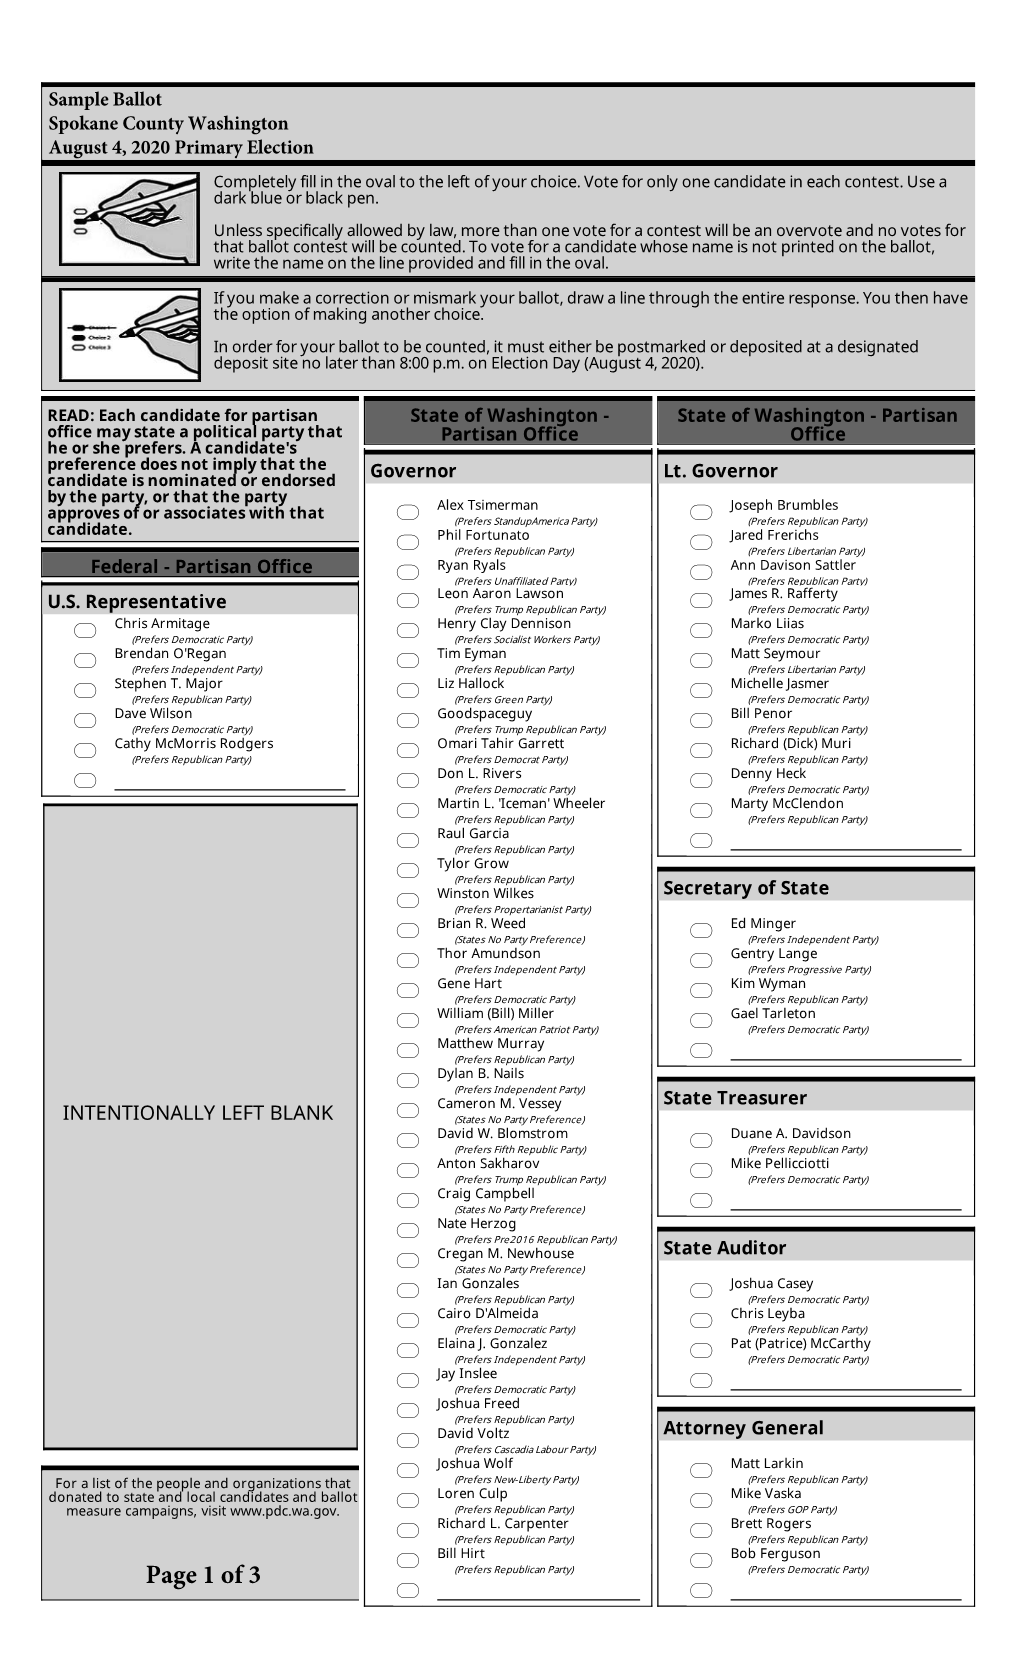 Sample Ballot Spokane County Washington August 4, 2020 Primary Election Completely Fill in the Oval to the Left of Your Choice